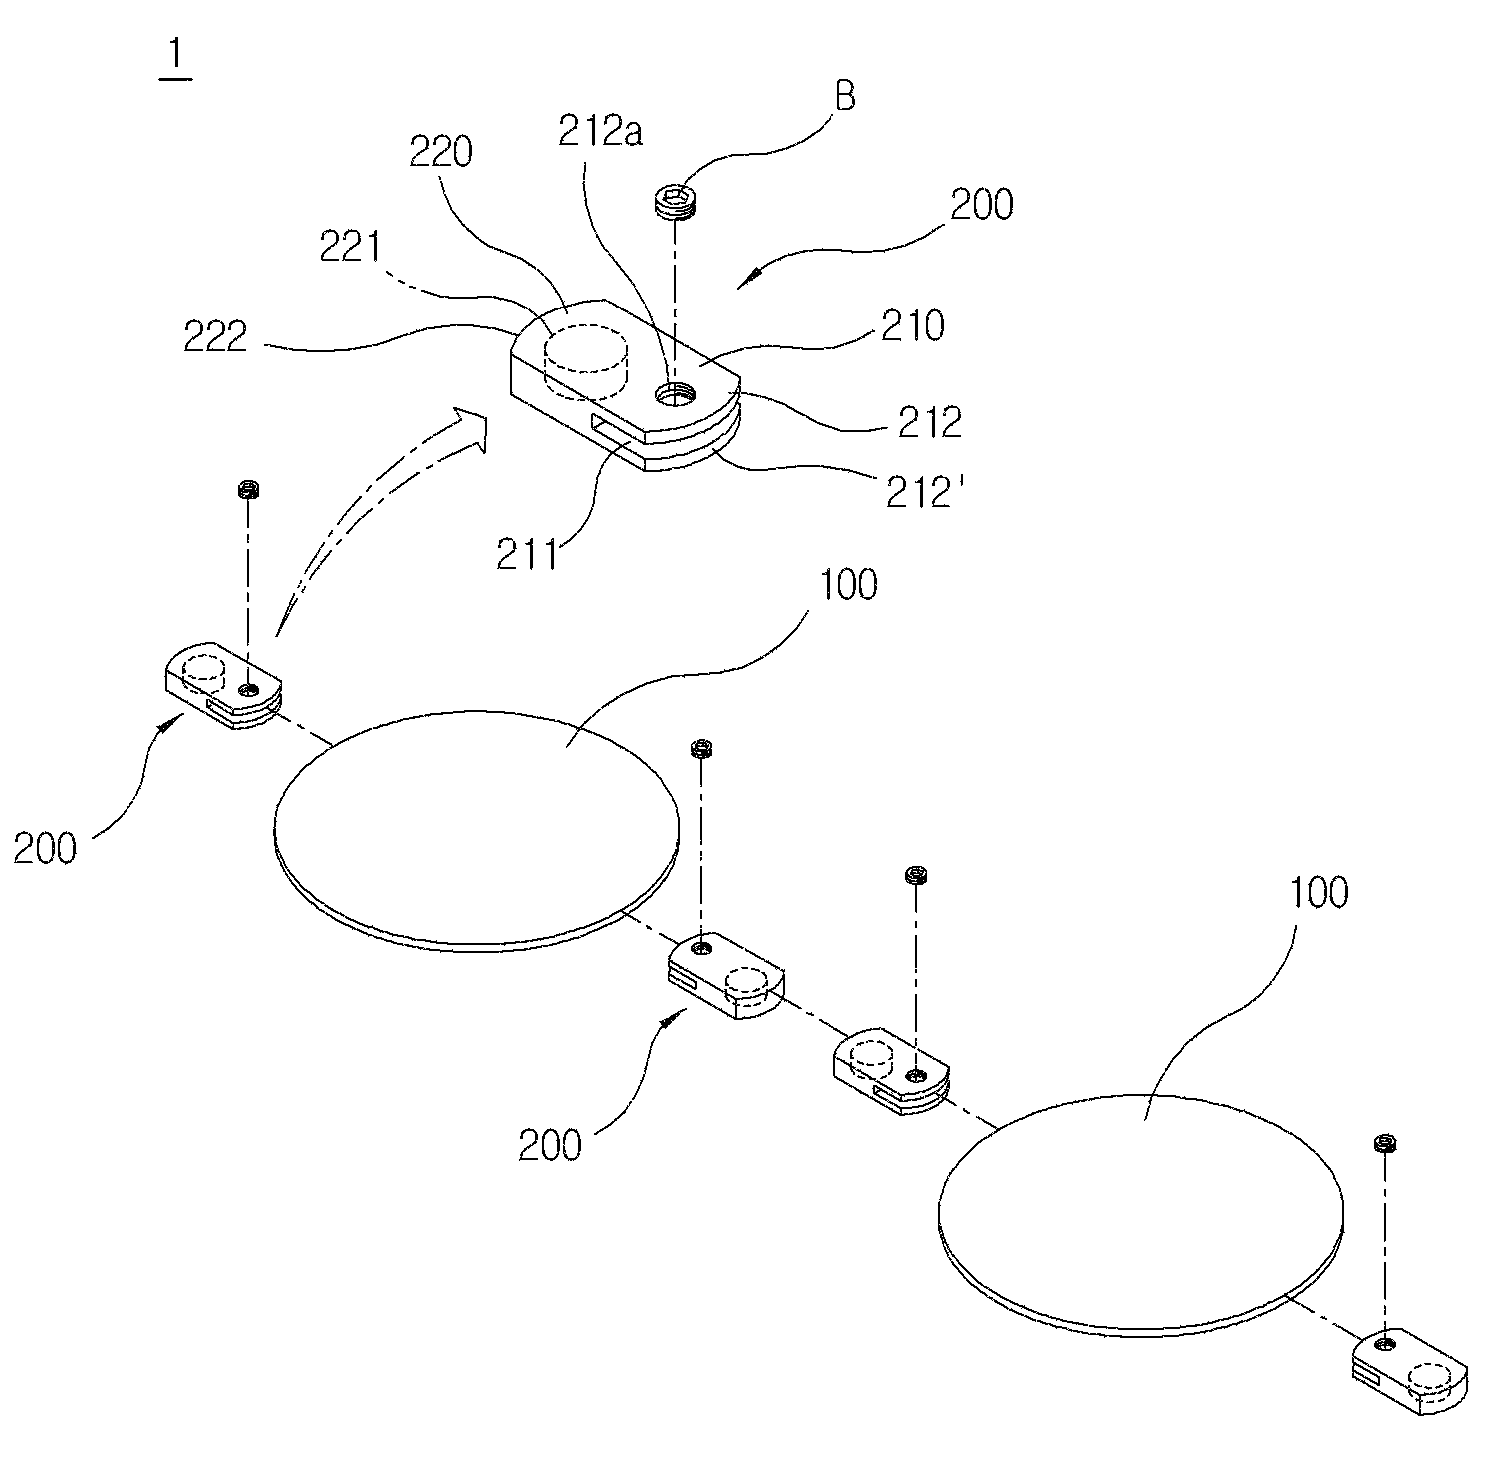 Accessory having decorative coin ornaments and connectors